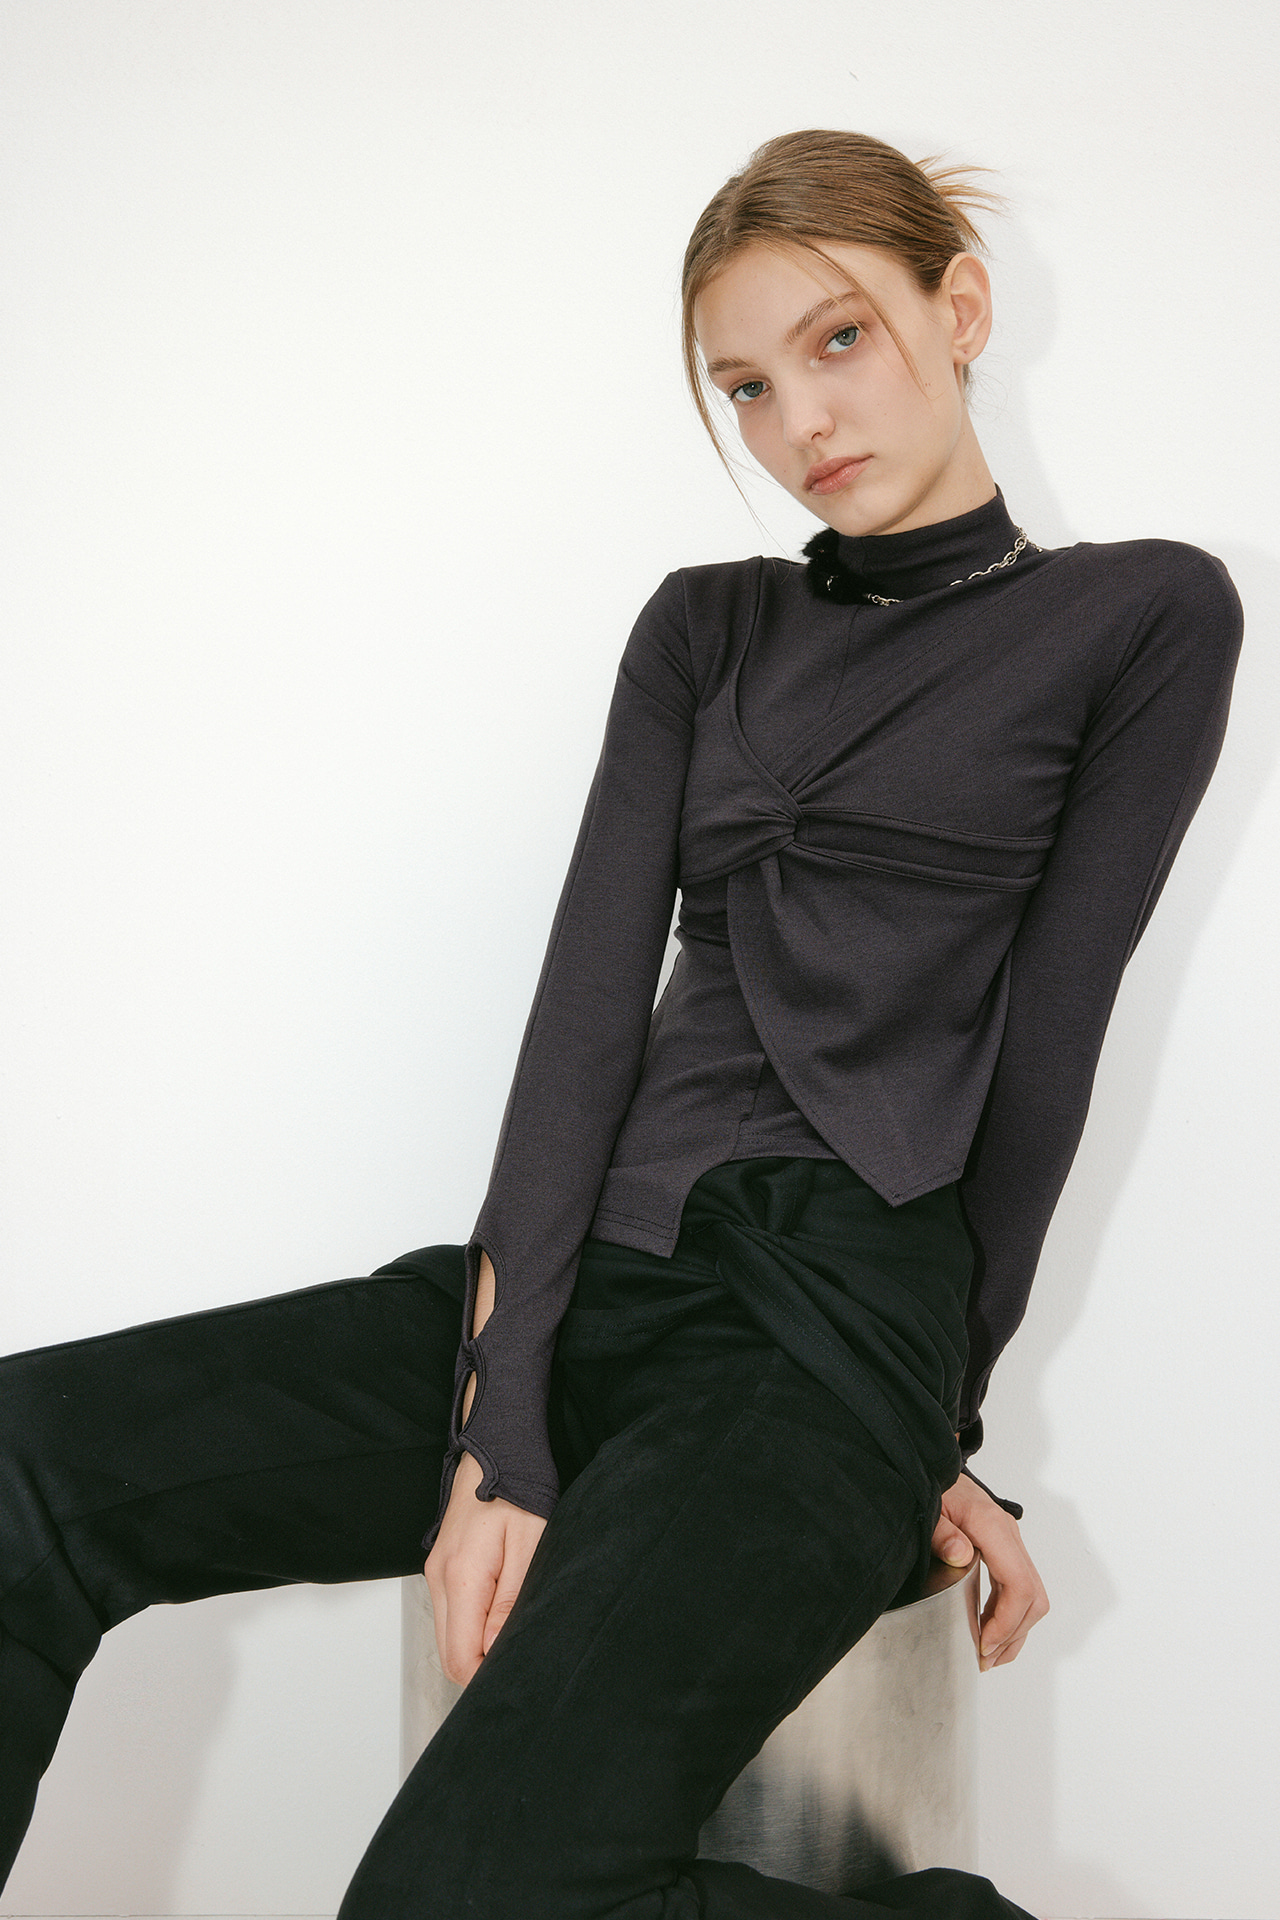 TWIST DETAIL LAYERED TOP - CHARCOAL